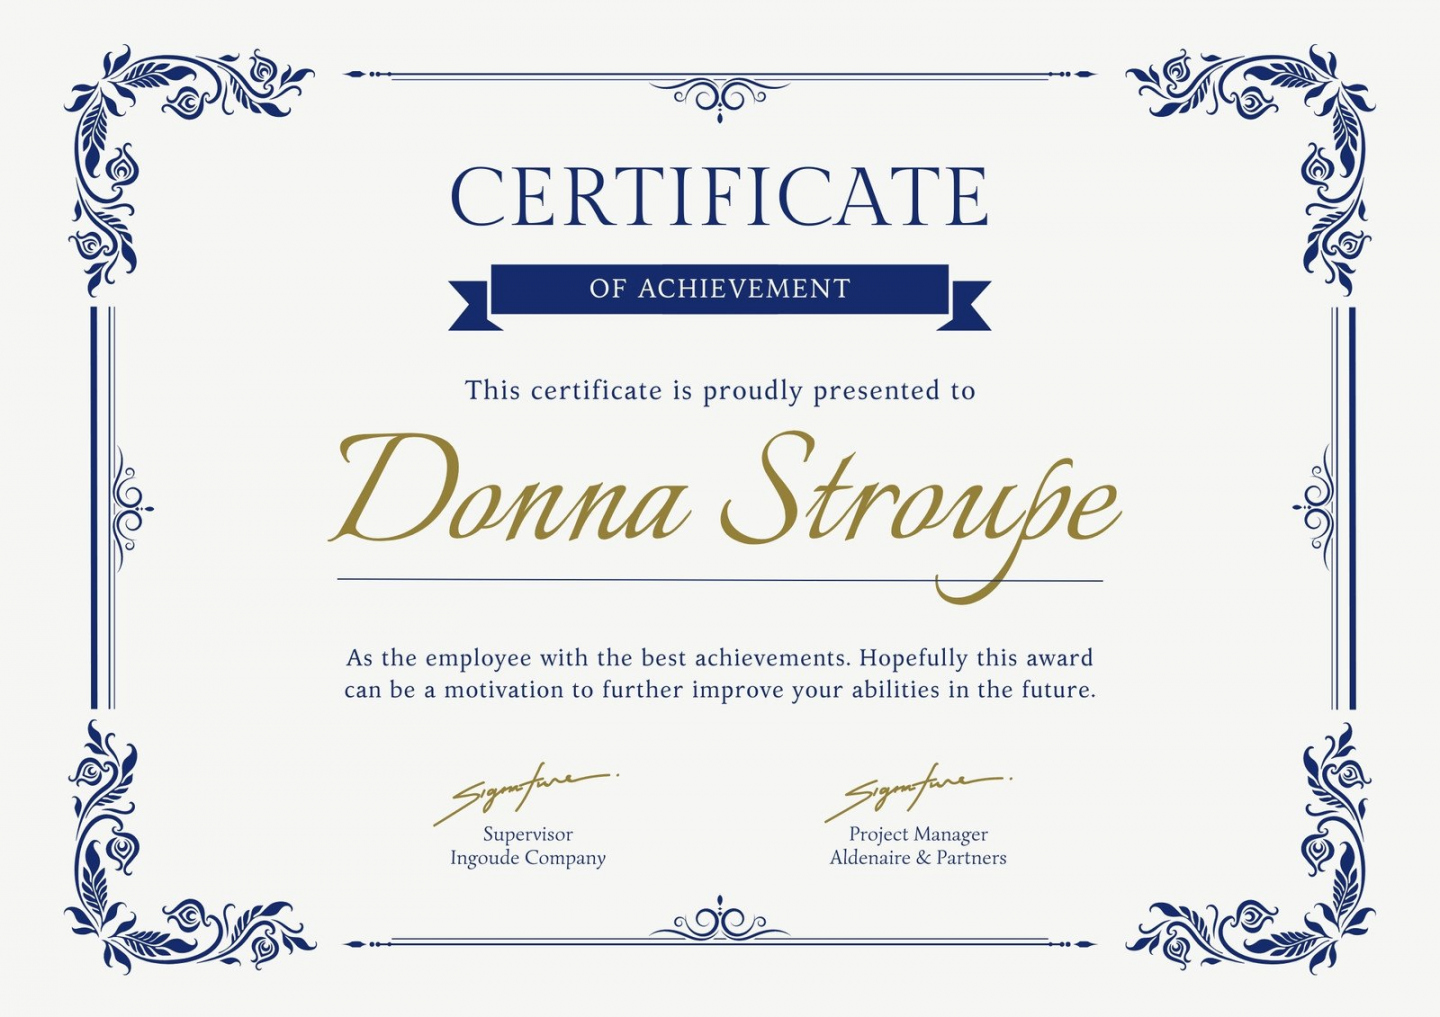 Free Online Courses With Printable Certificates - Printable - Free printable, customizable course certificate templates  Canva